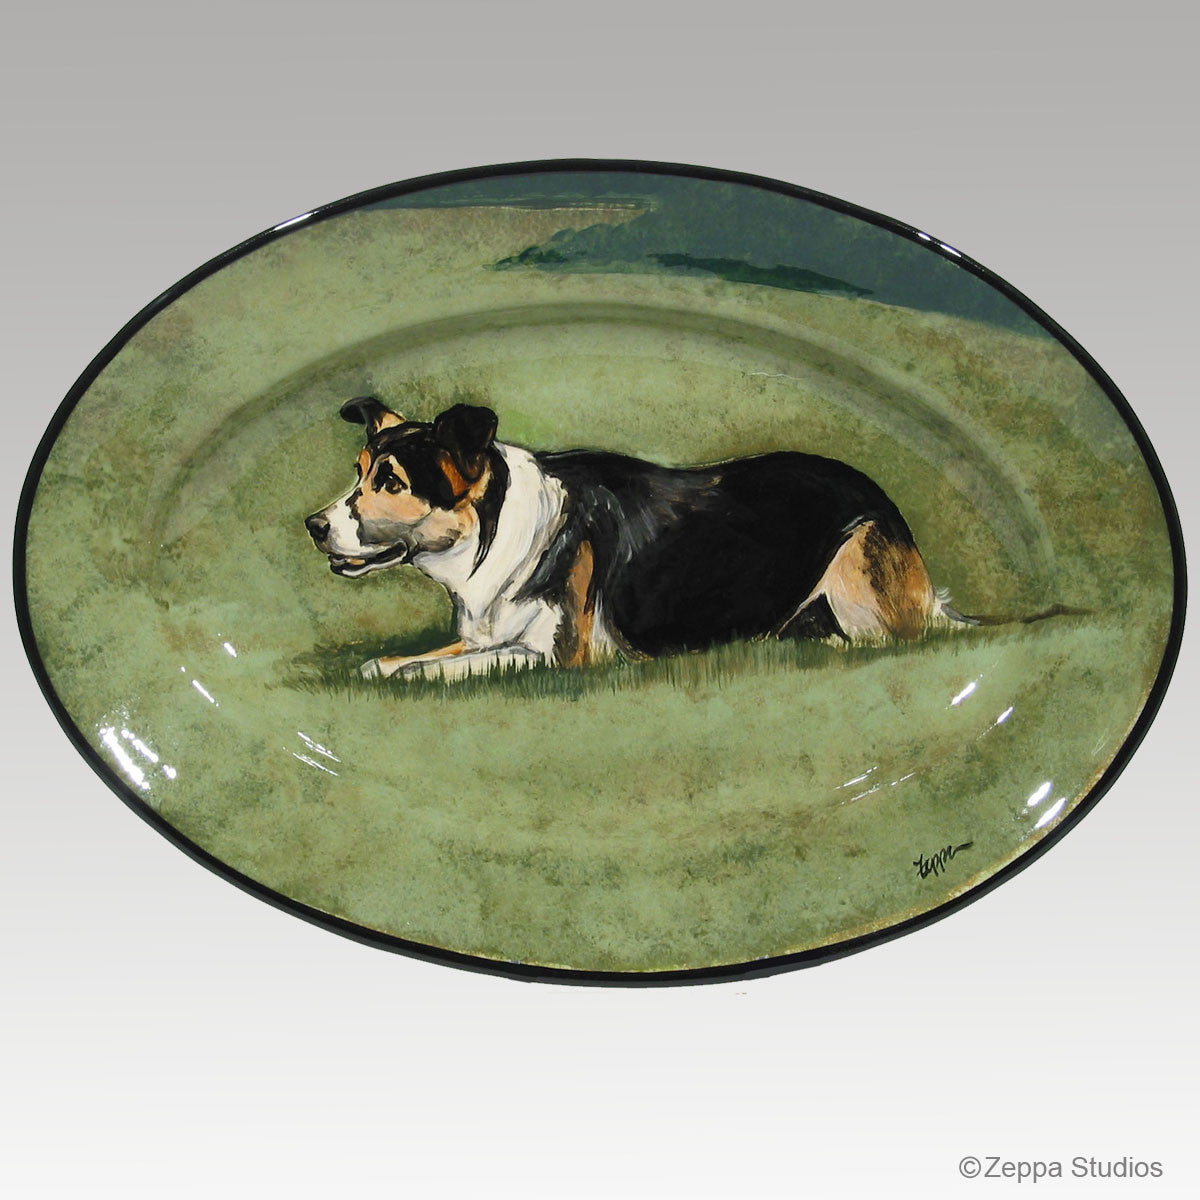 Gallery Style Hand Painted Rim Platter, Border Collie